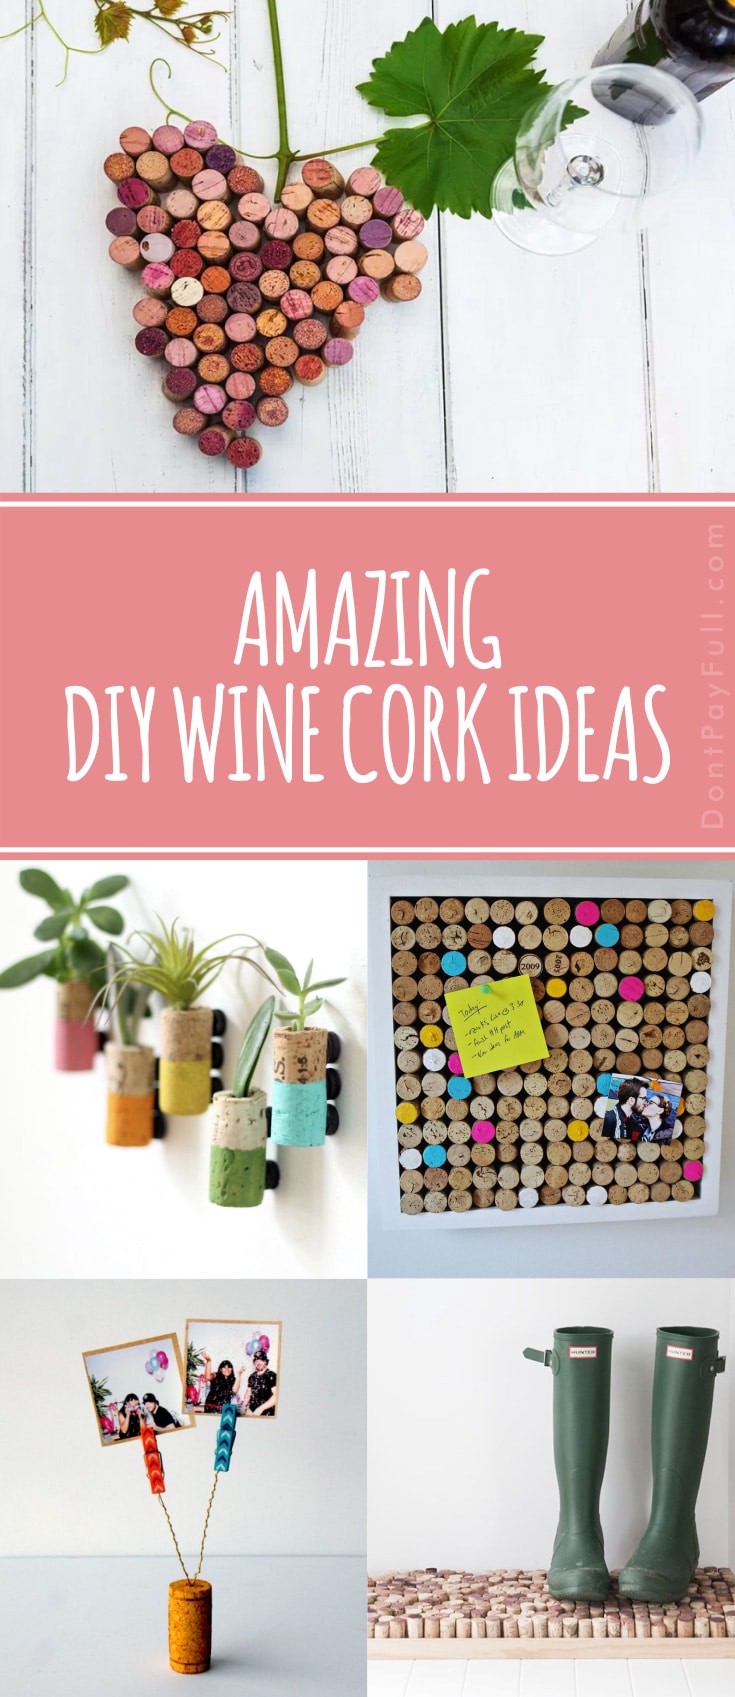 Amazing Wine Cork Crafts That Can Make You Money